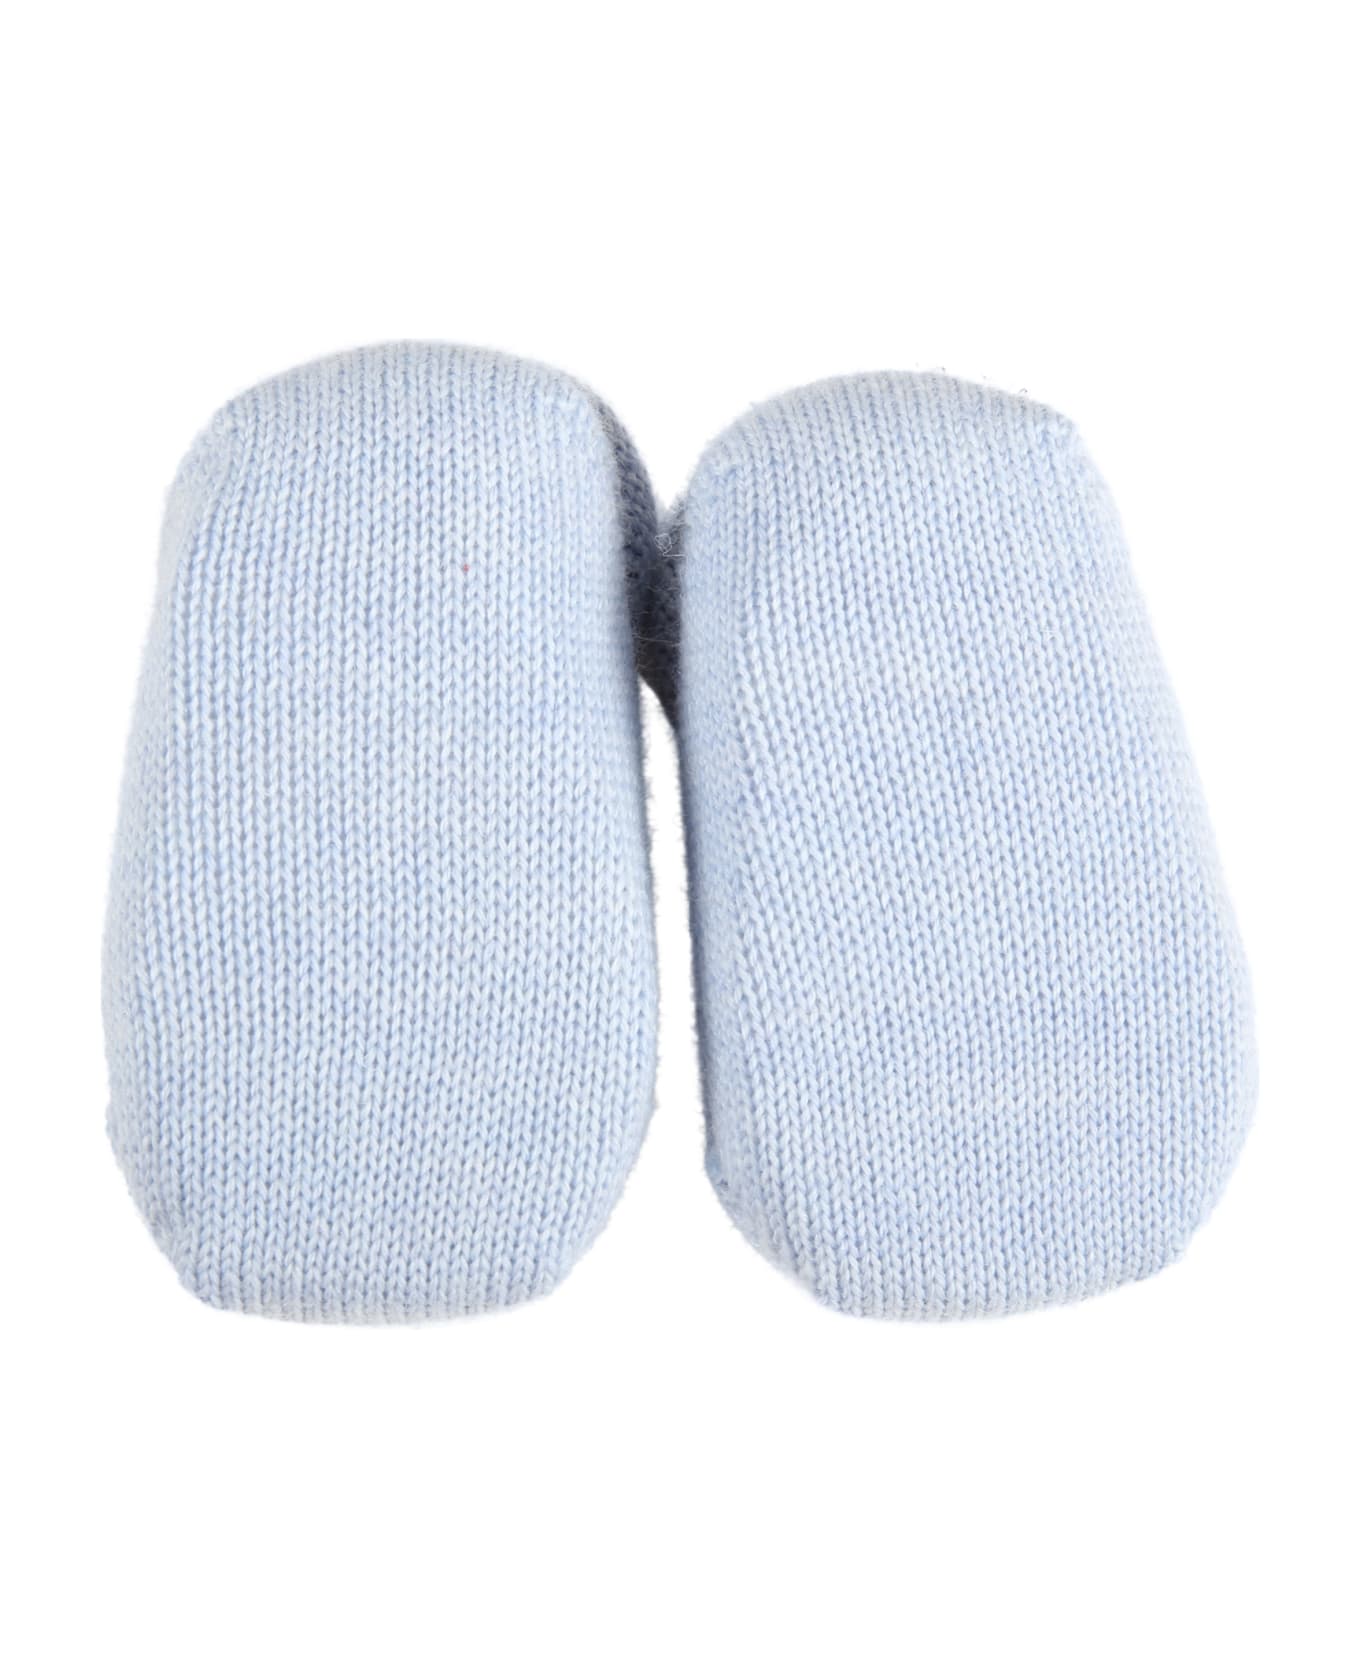 Story Loris Light-blue Baby-bootee For Baby Boy - Light Blue アクセサリー＆ギフト